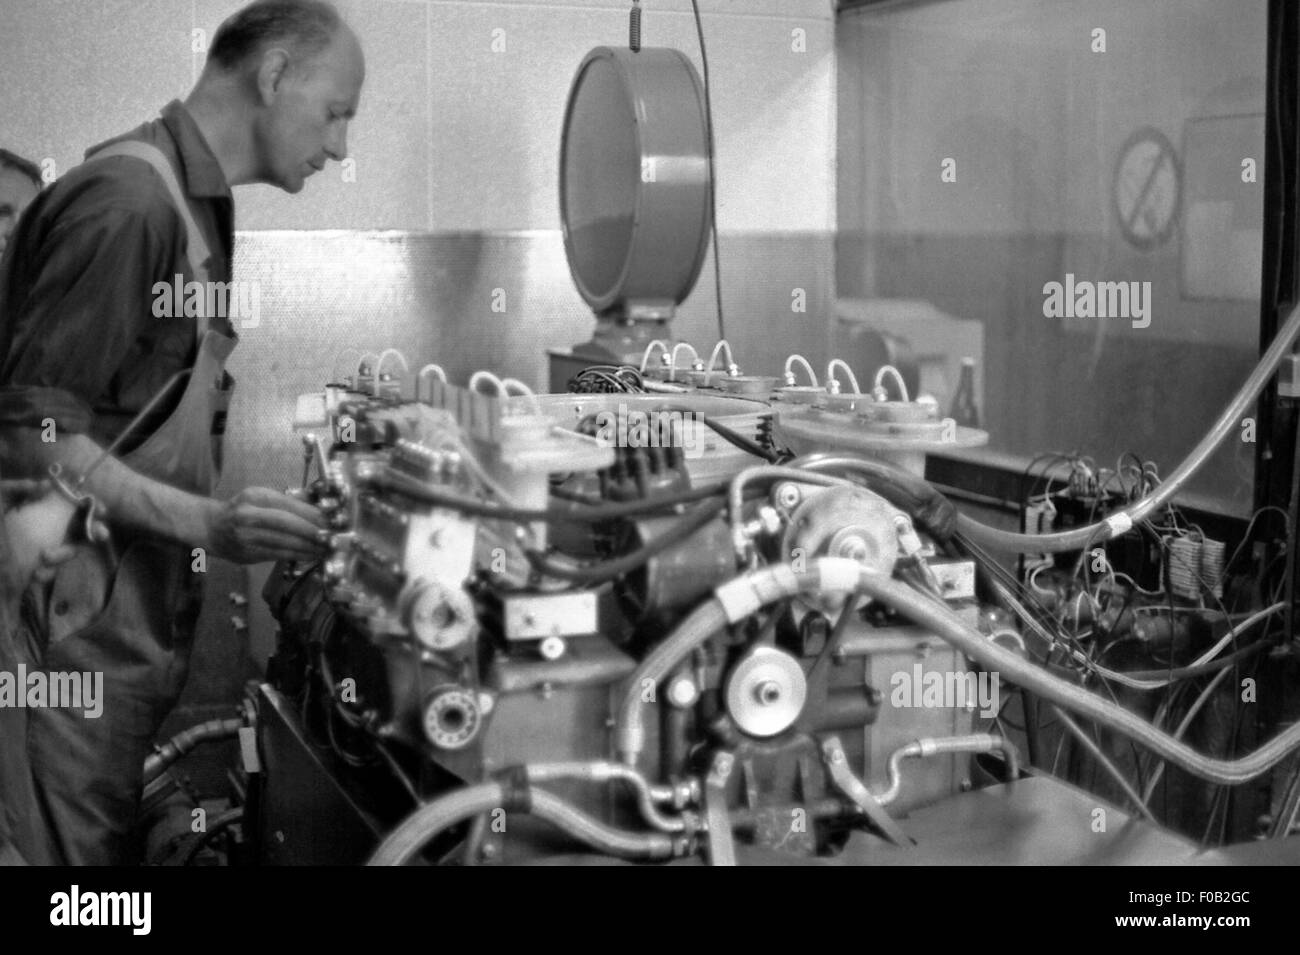 Engine testing on a Porsche 917 in 1969 Stock Photo